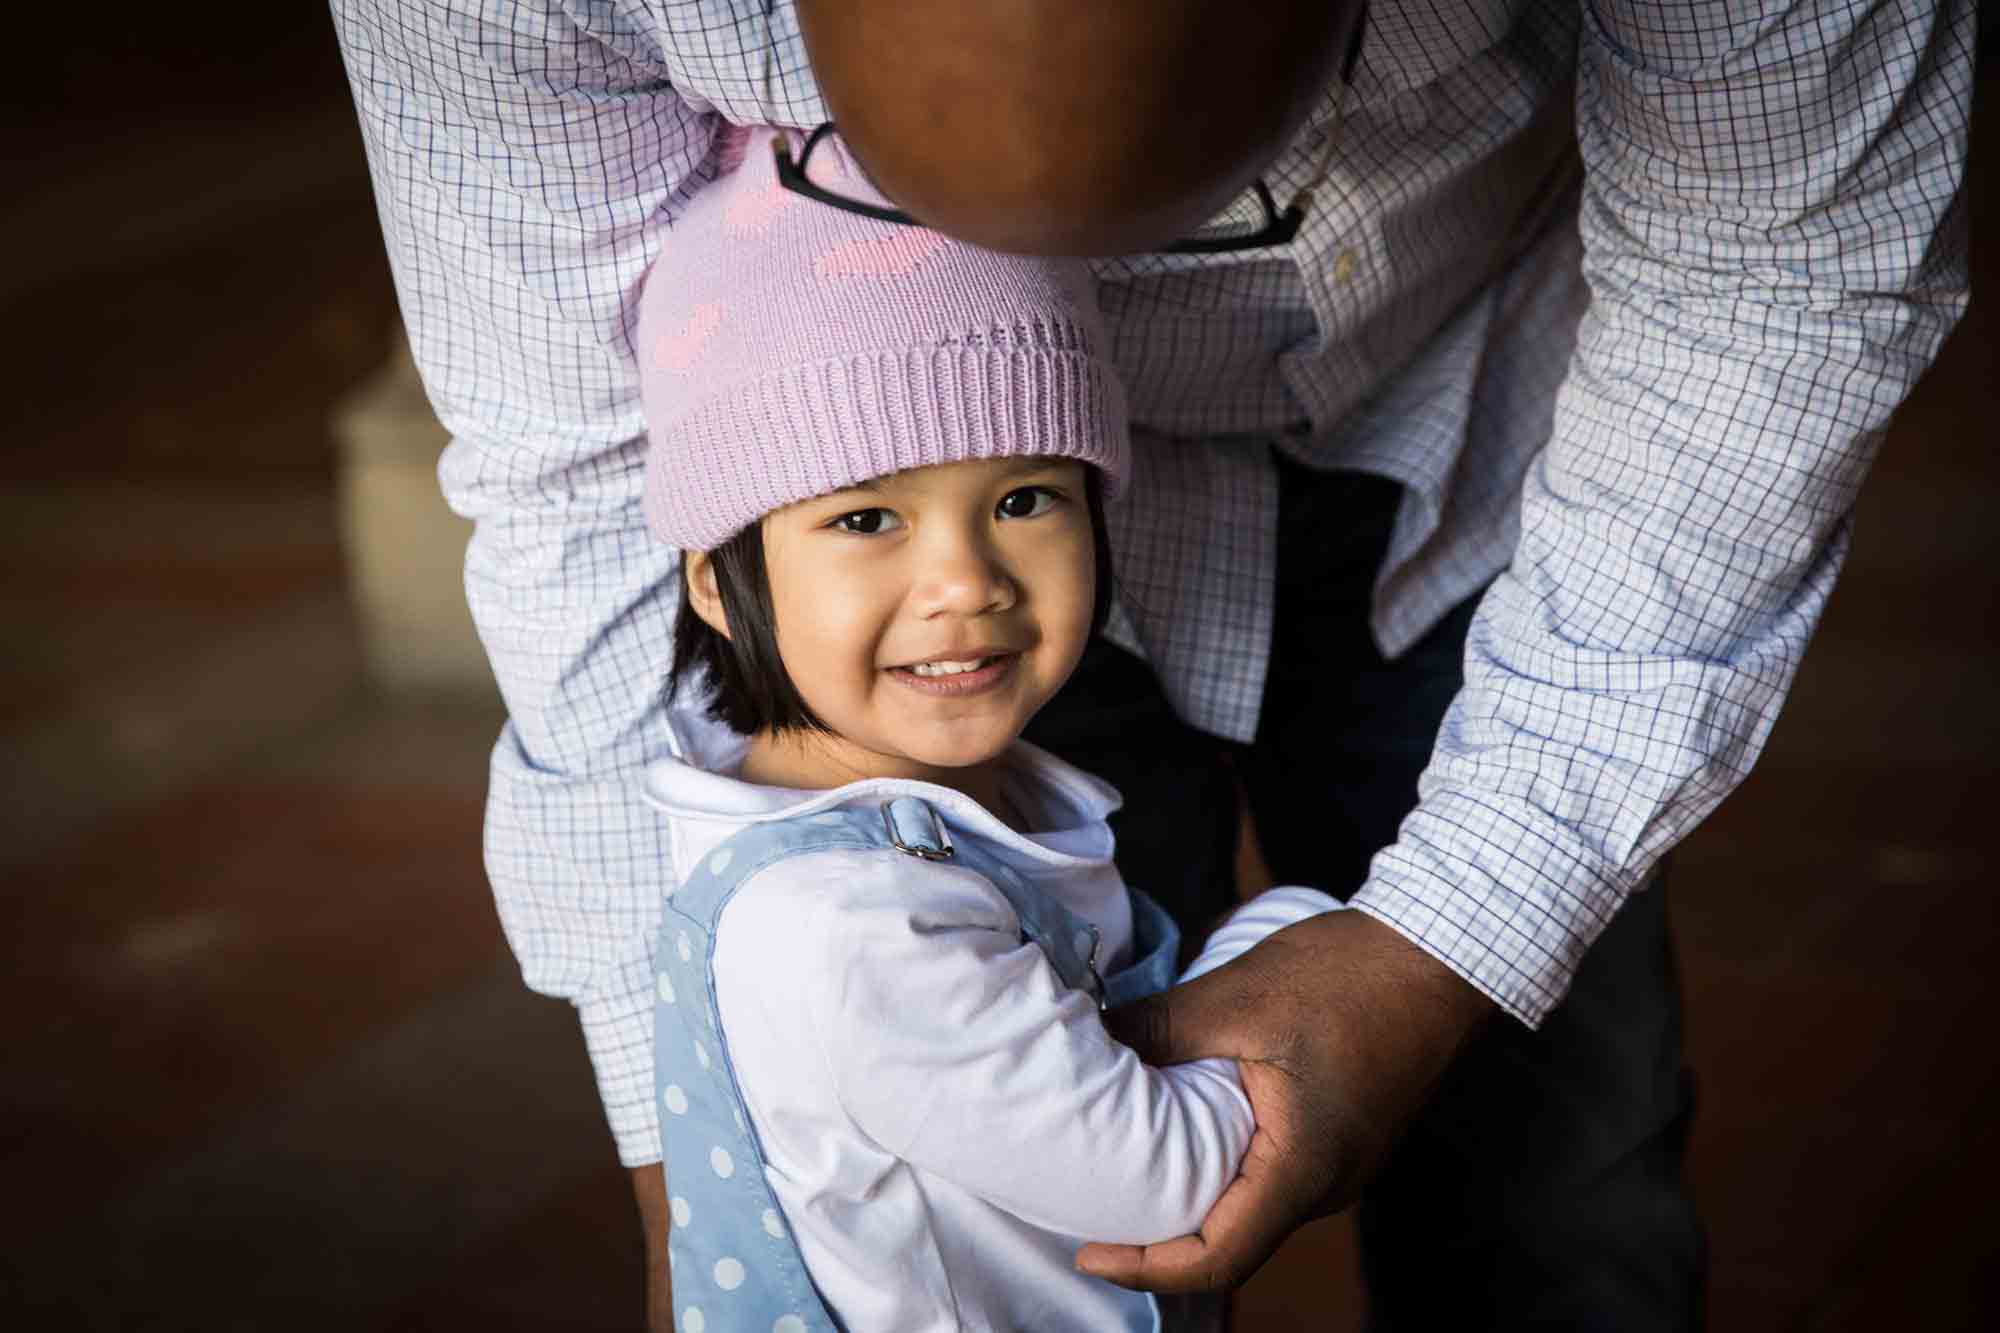 Little girl wearing pink knit cap and white shirt during a Central Park family portrait